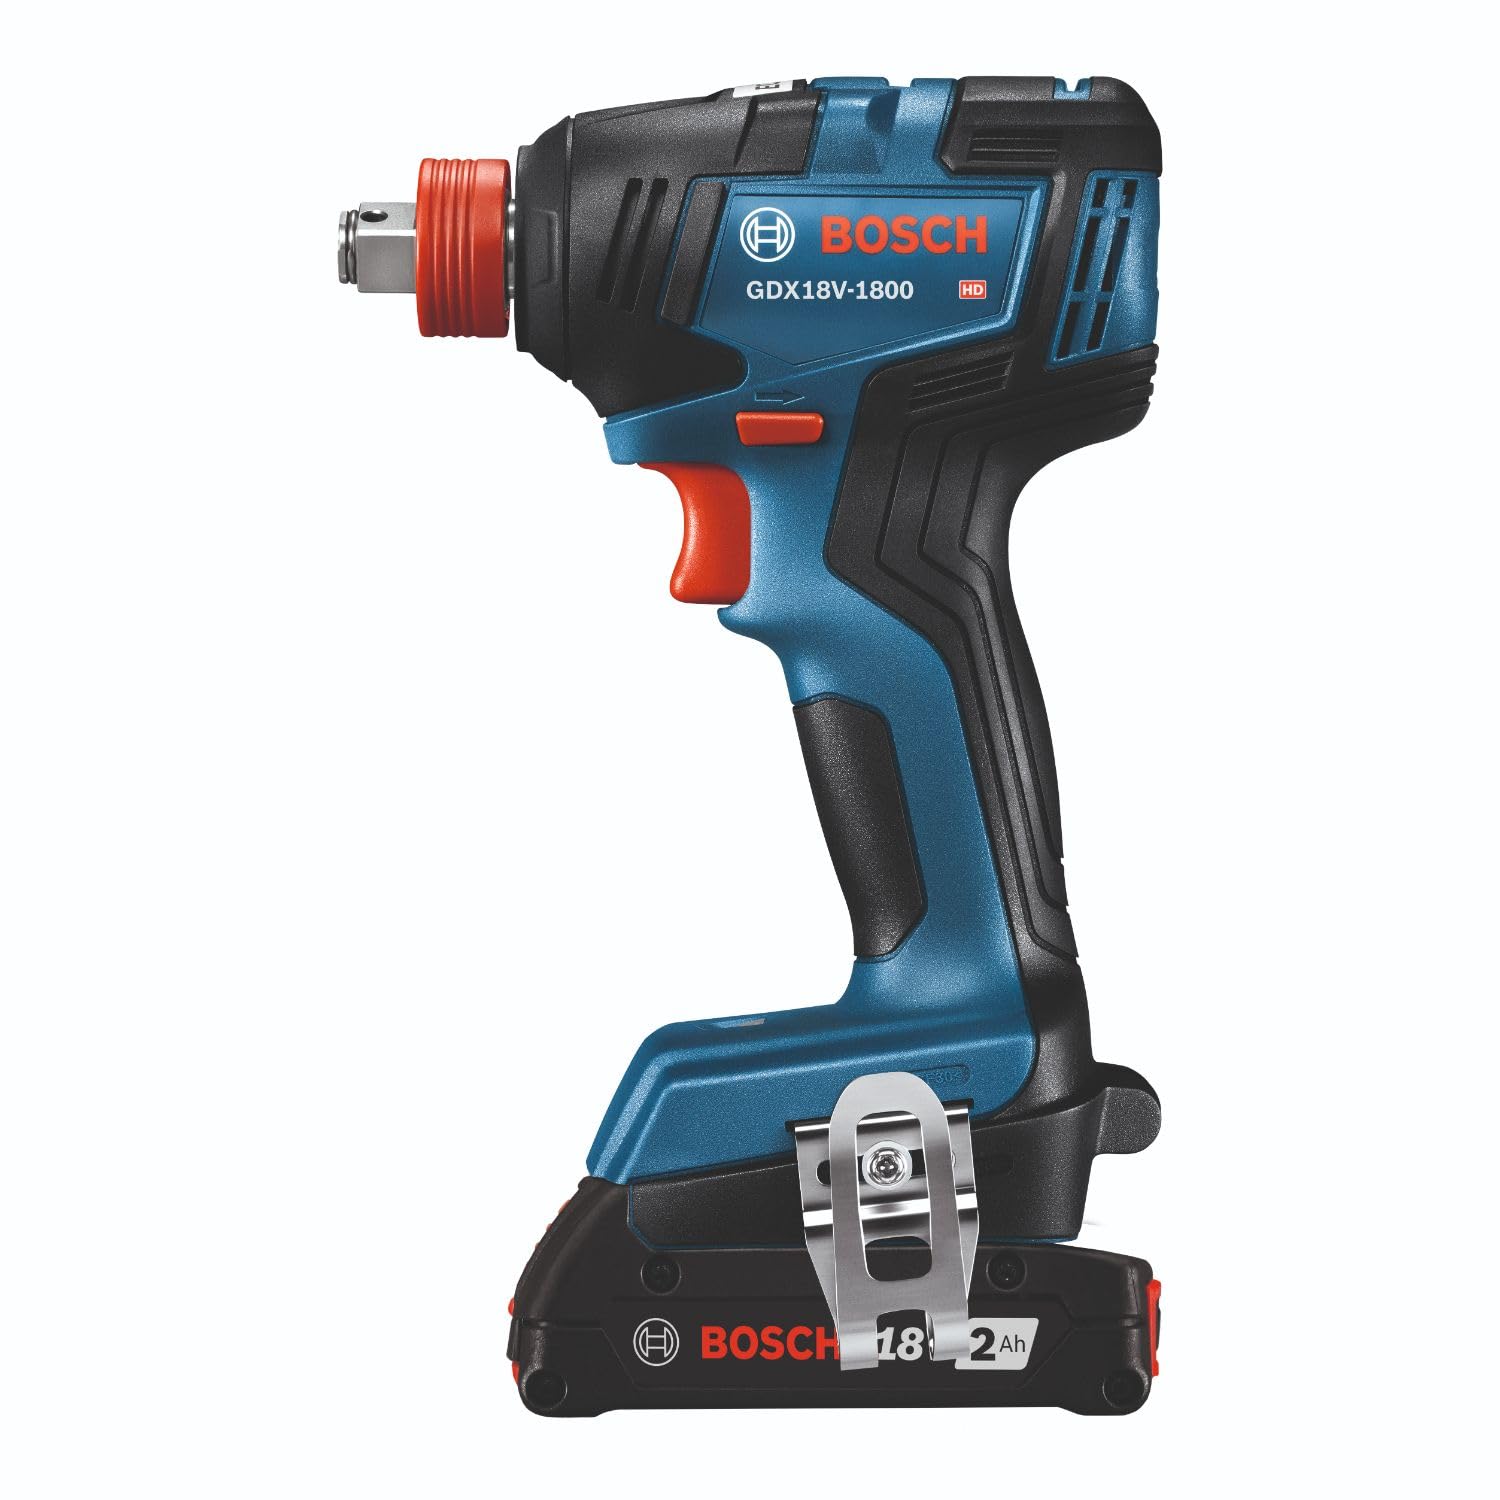 BOSCH GXL18V-240B22 18V 2-Tool Combo Kit with 1/2 In. Hammer Drill/Driver, Two-In-One 1/4 In. and 1/2 In. Bit/Socket Impact Driver/Wrench and (2) 2 Ah Standard Power Batteries